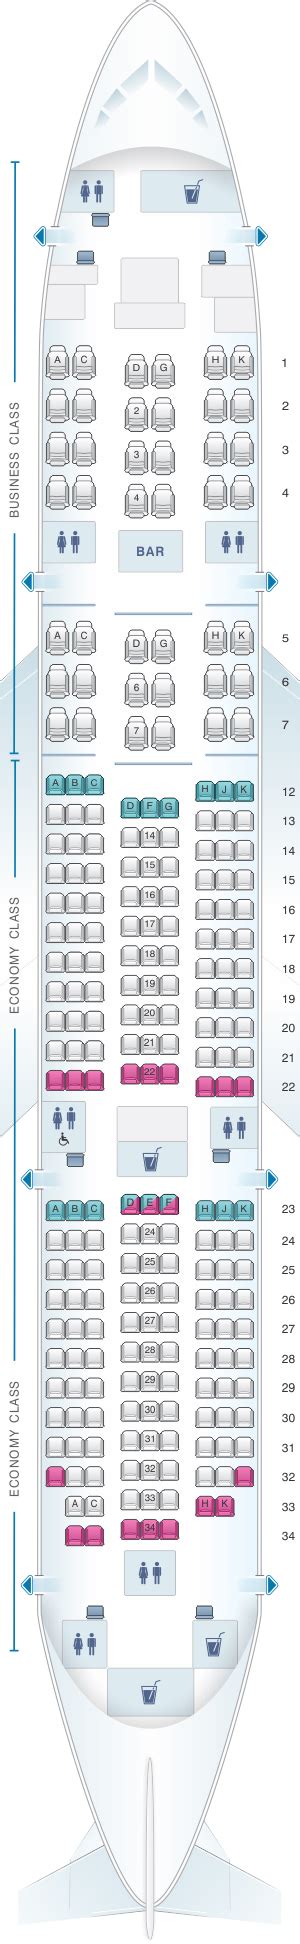 Ana Seating Chart Hot Sex Picture